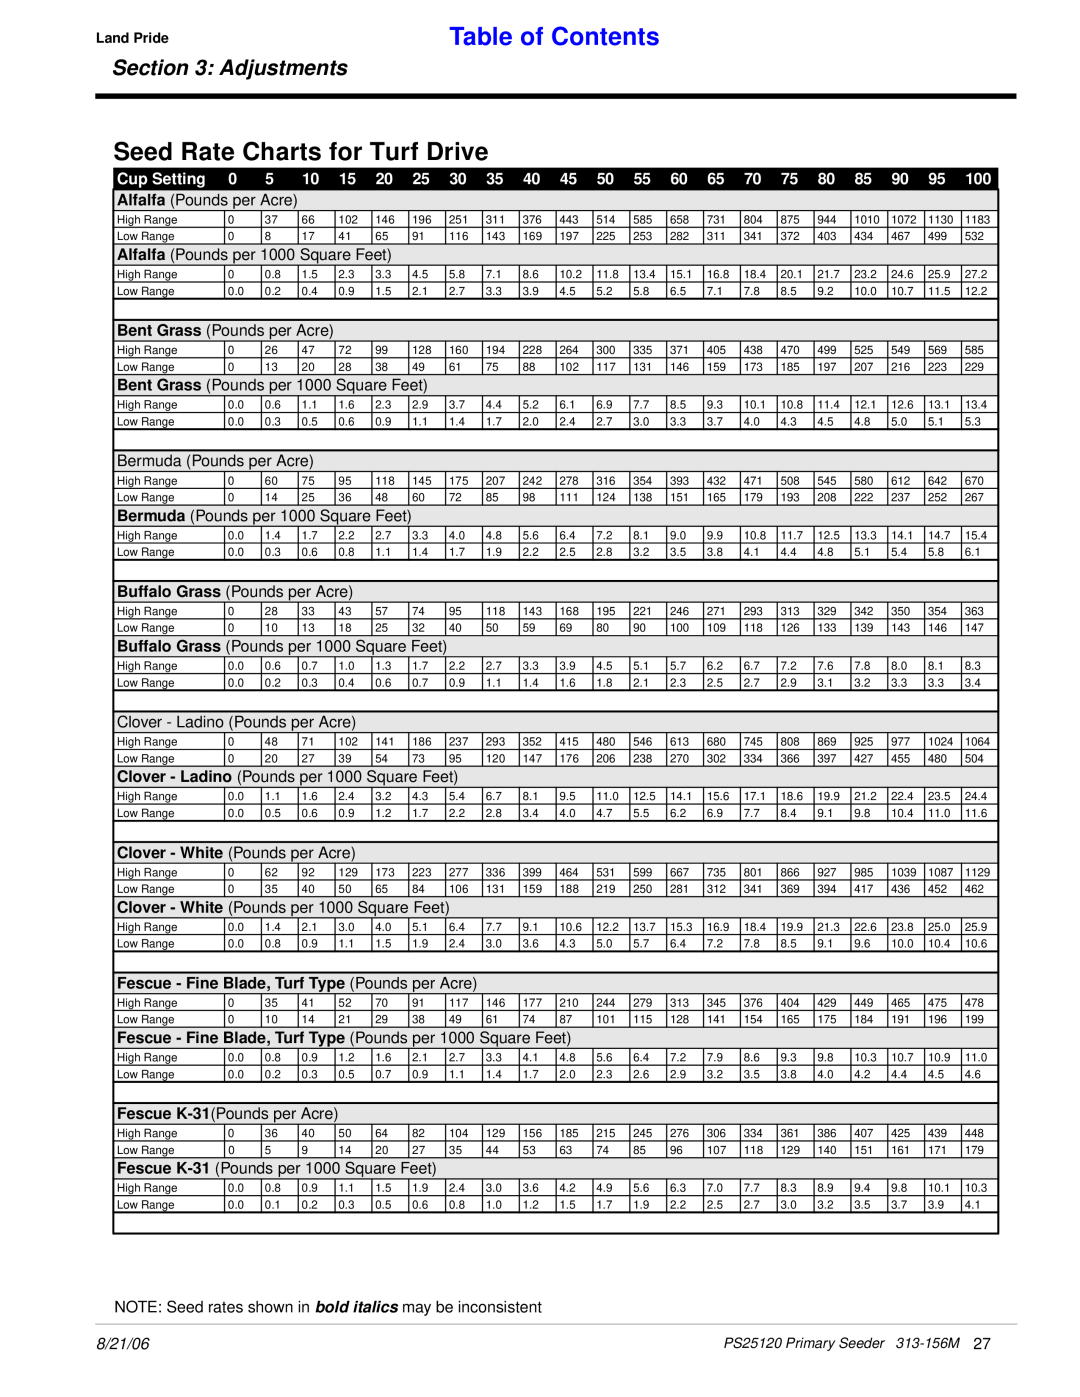 Land Pride PS25120 manual Seed Rate Charts for Turf Drive, Table of Contents, Adjustments 